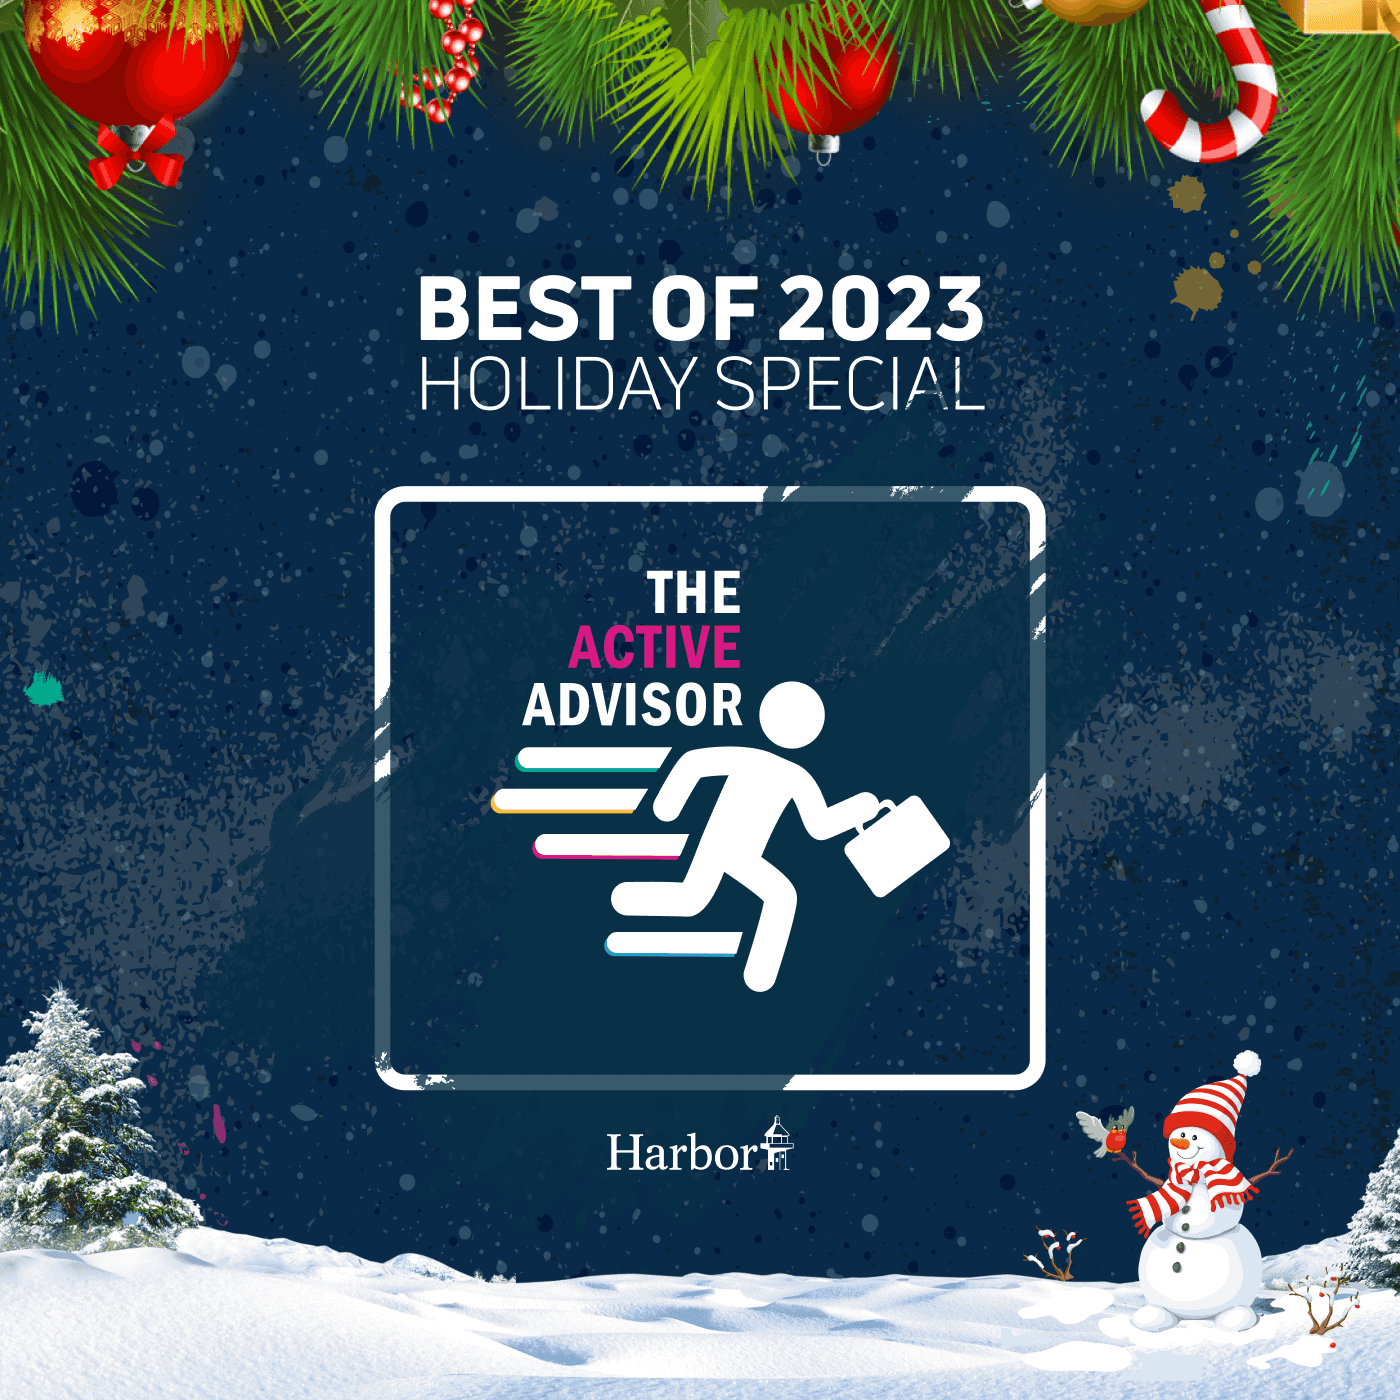 Best of 2023 Holiday Special: The Active Advisor. 